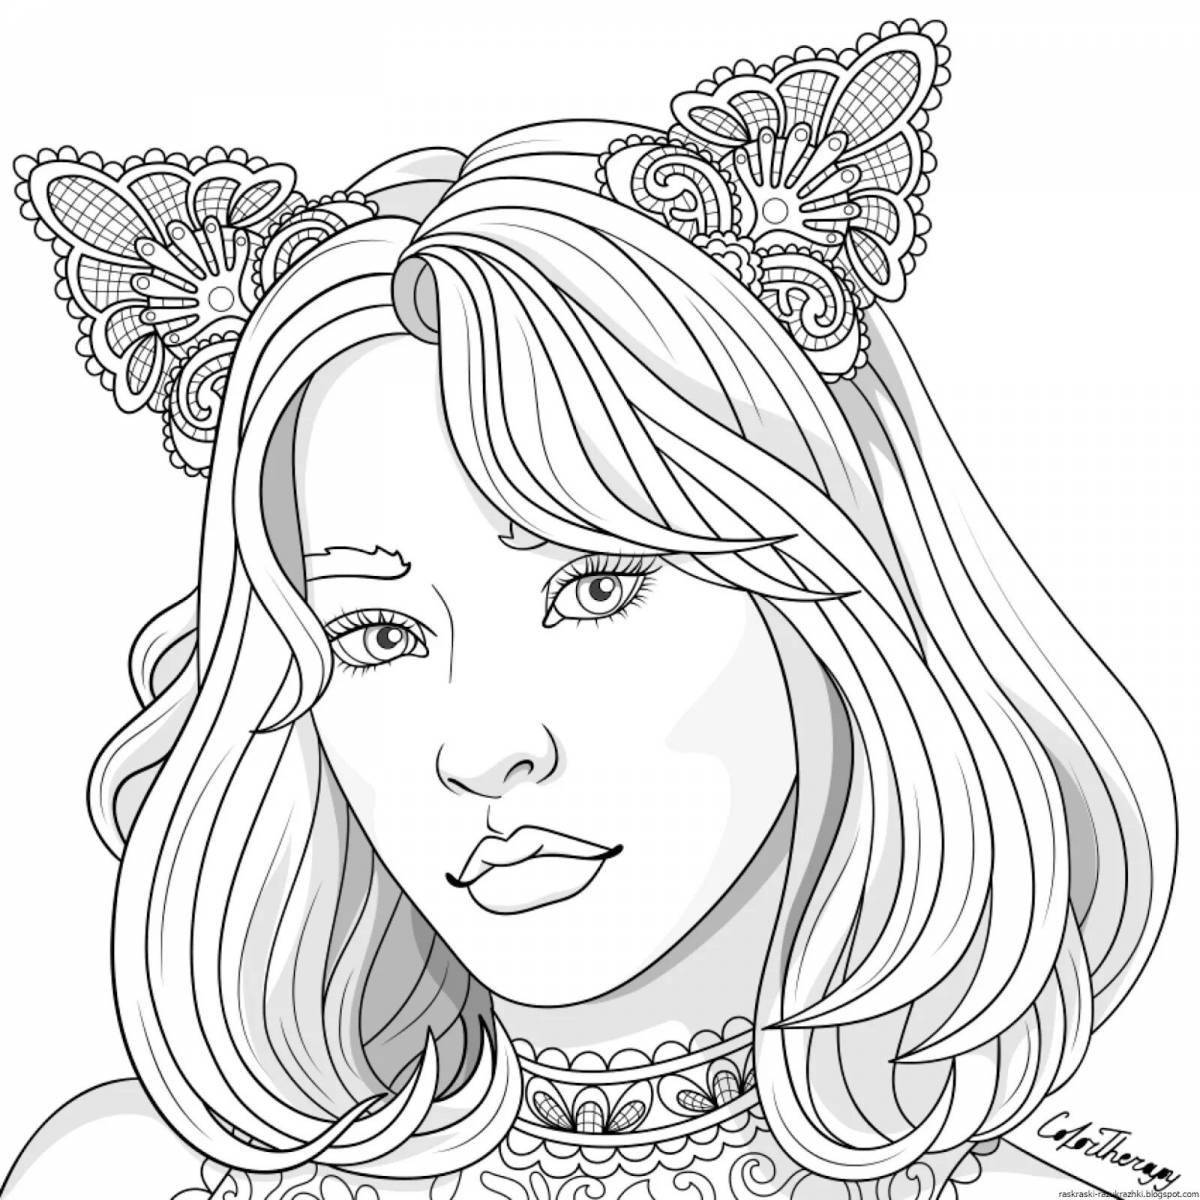 Fantastic coloring book for girls 10-12 years old